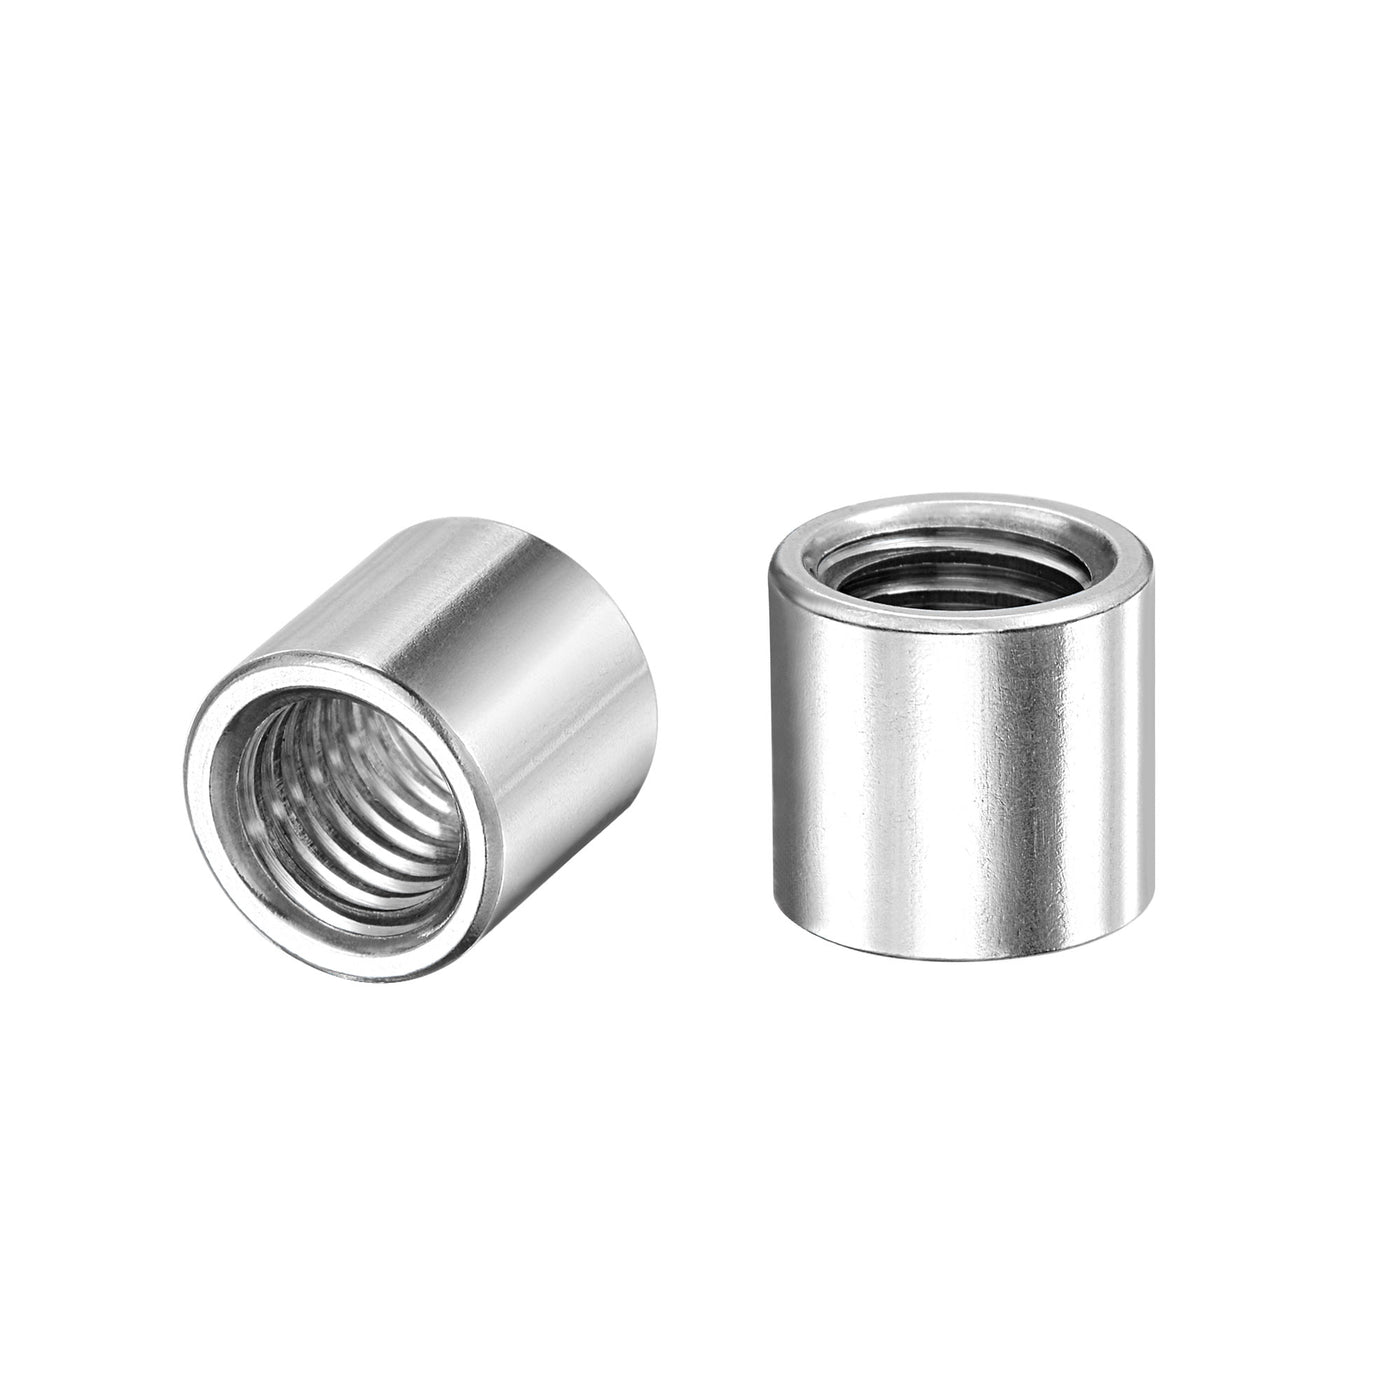 Uxcell Uxcell M10x14mmx13mm Weld On Bung Nut Threaded 201 Stainless Steel Insert Weldable